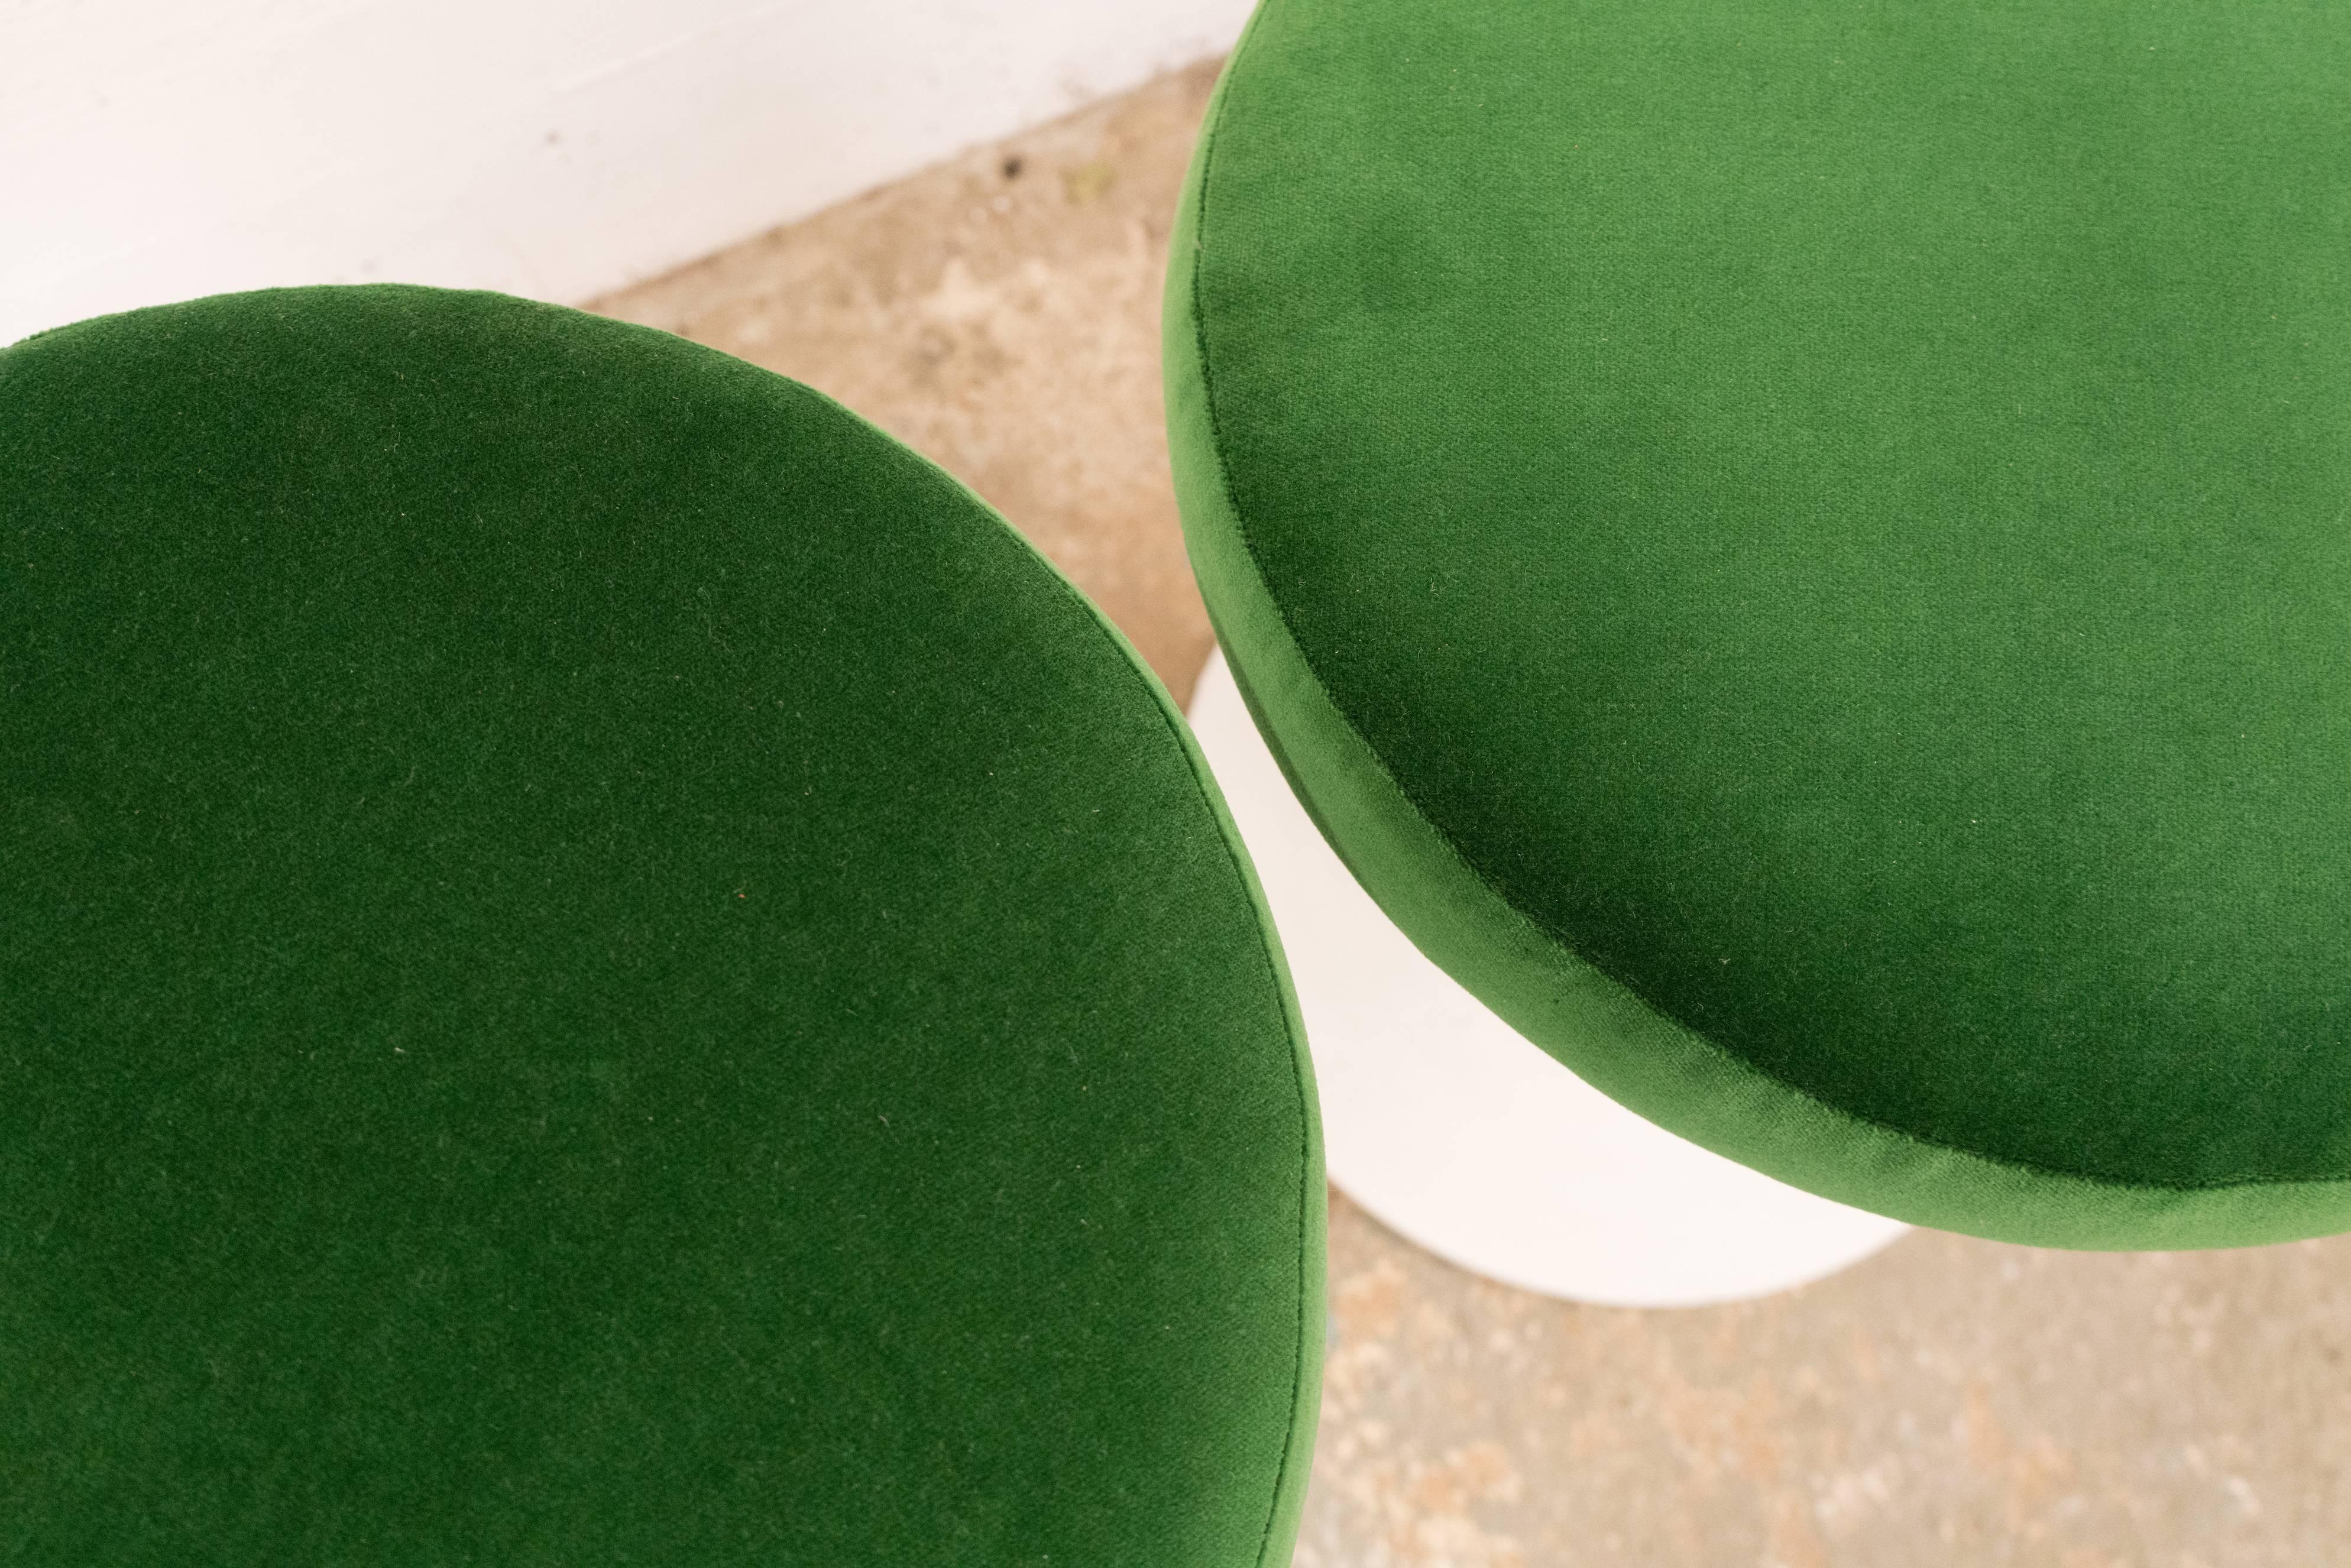 Four Eero Saarinen for Knoll stools, newly upholstered in a lush green velvet.